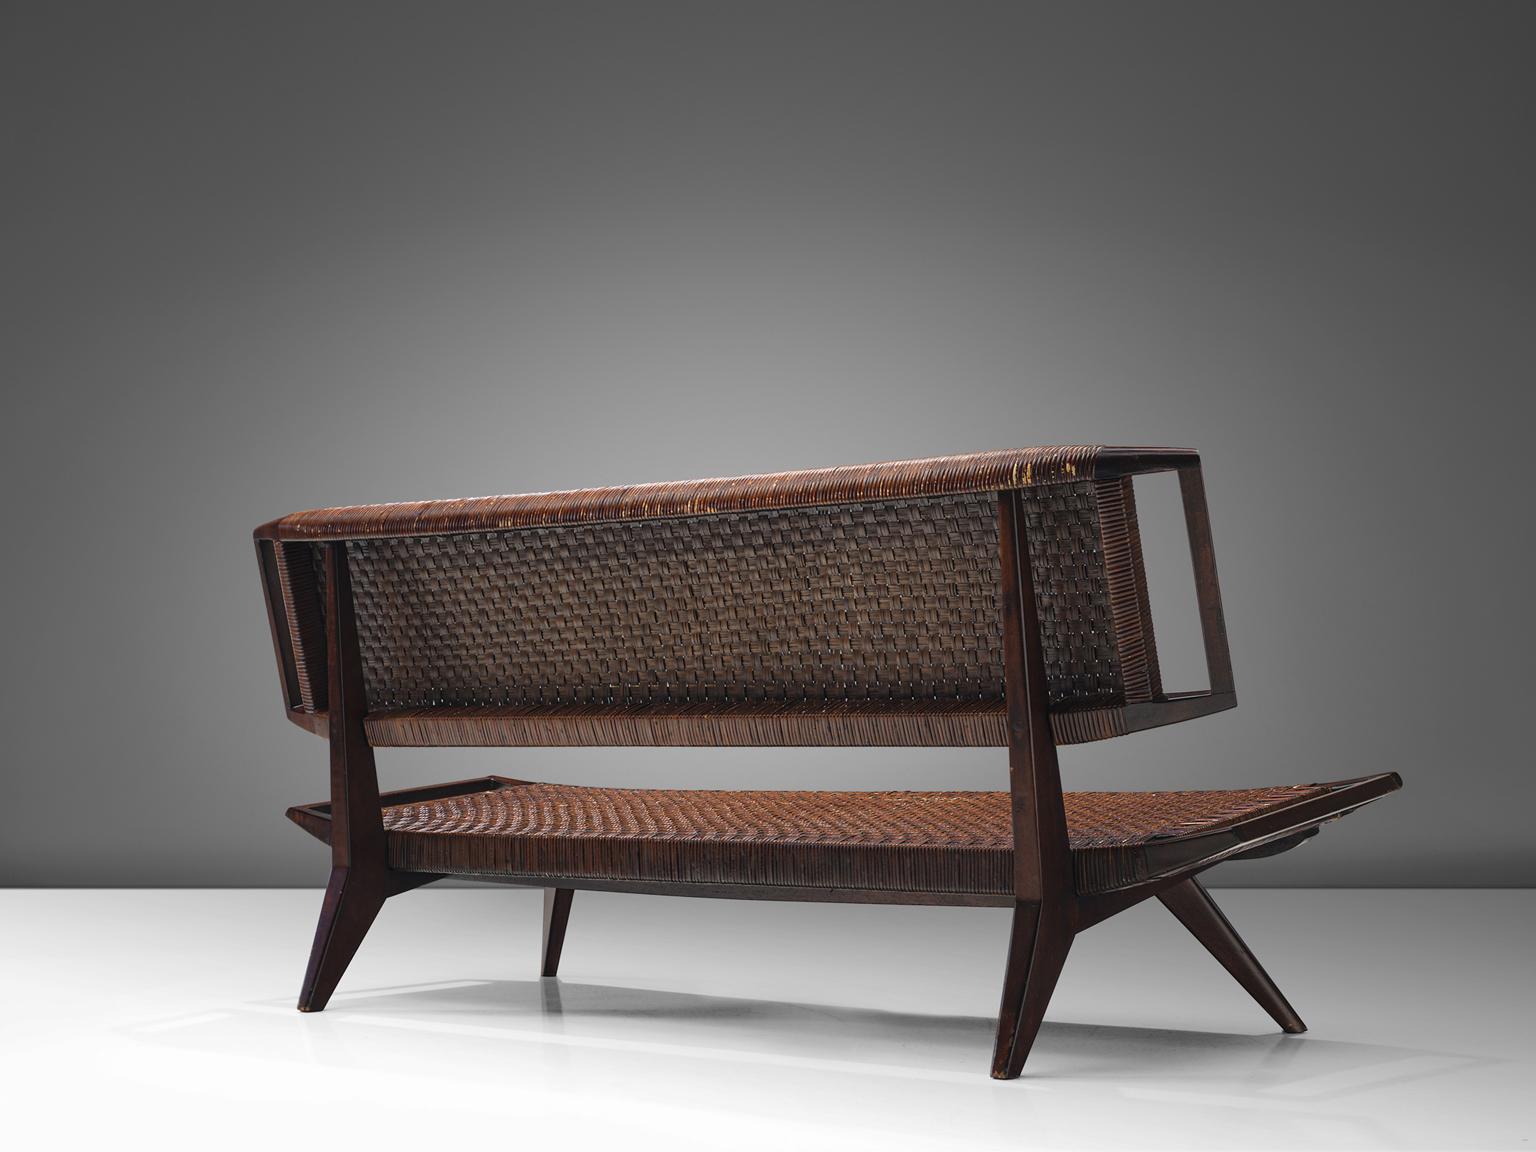 Paul László for Glenn of California, settee, cane and mahogany, United States, 1950.

This sofa bench by Paul László is designed with a caned back and seat that is in good patinated condition. The legs of the sofa are pointed outwards and feature